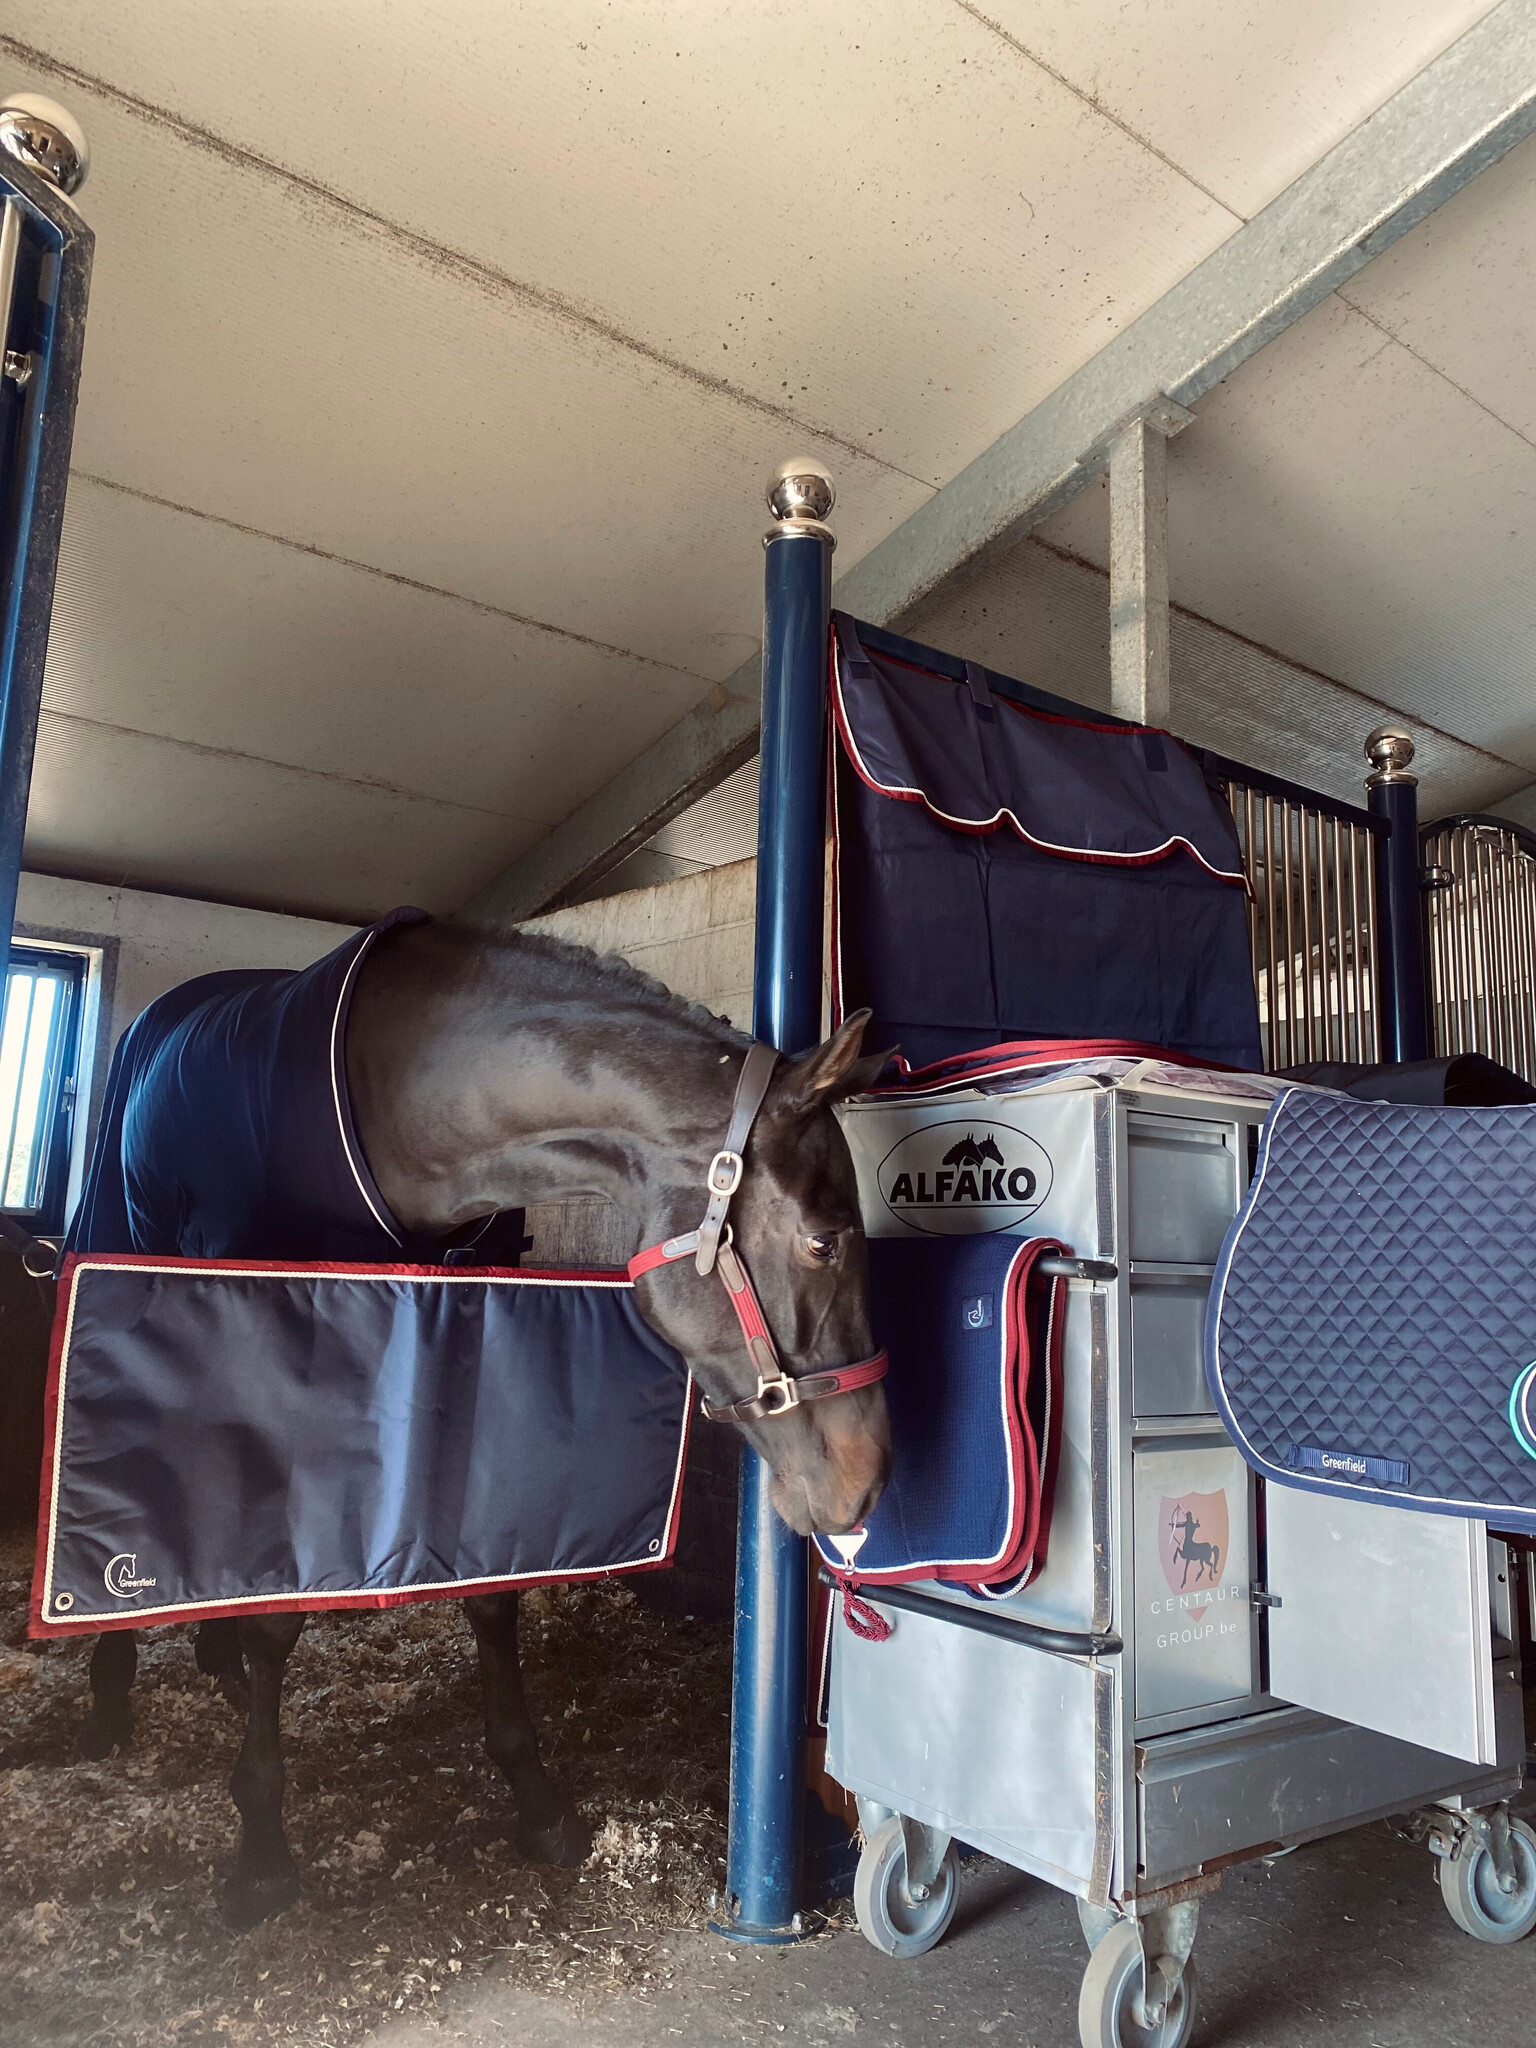 Safer, Comfier Horses in the Stable.